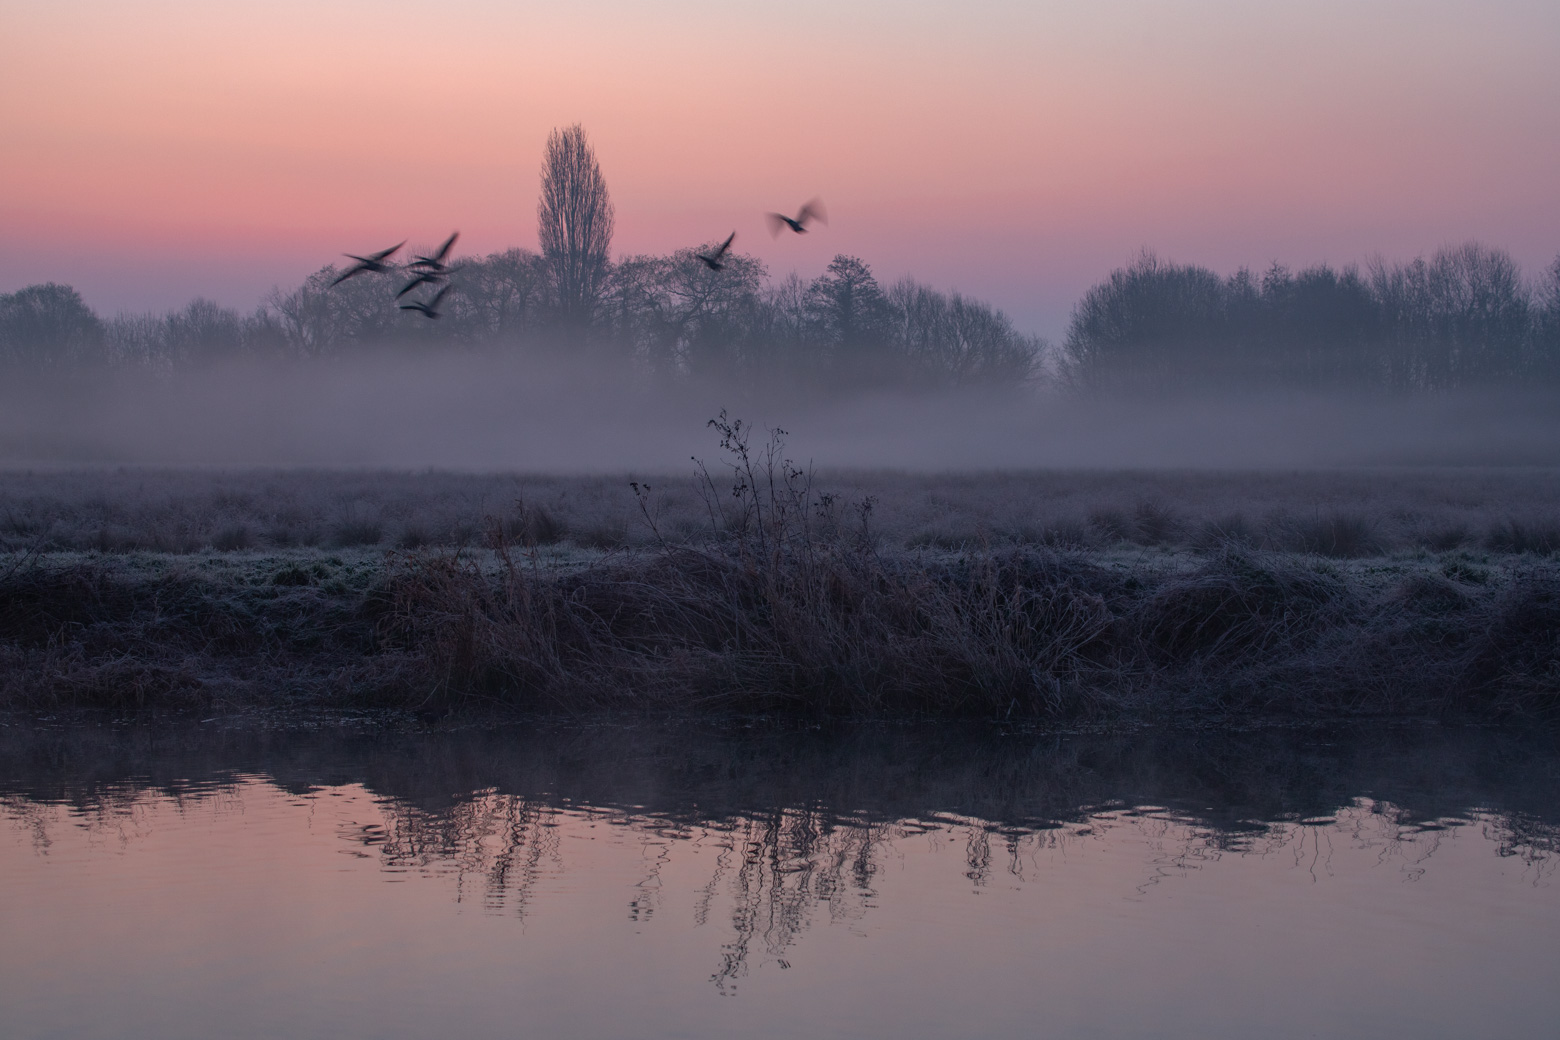 Taken on the same March 2022 morning as my favourite sunrise photo, as I waited for the owl I heard some Geese taking off and quickly rattled off a few frames, hoping to catch them in the scene, and making a nice addition to the landscape.